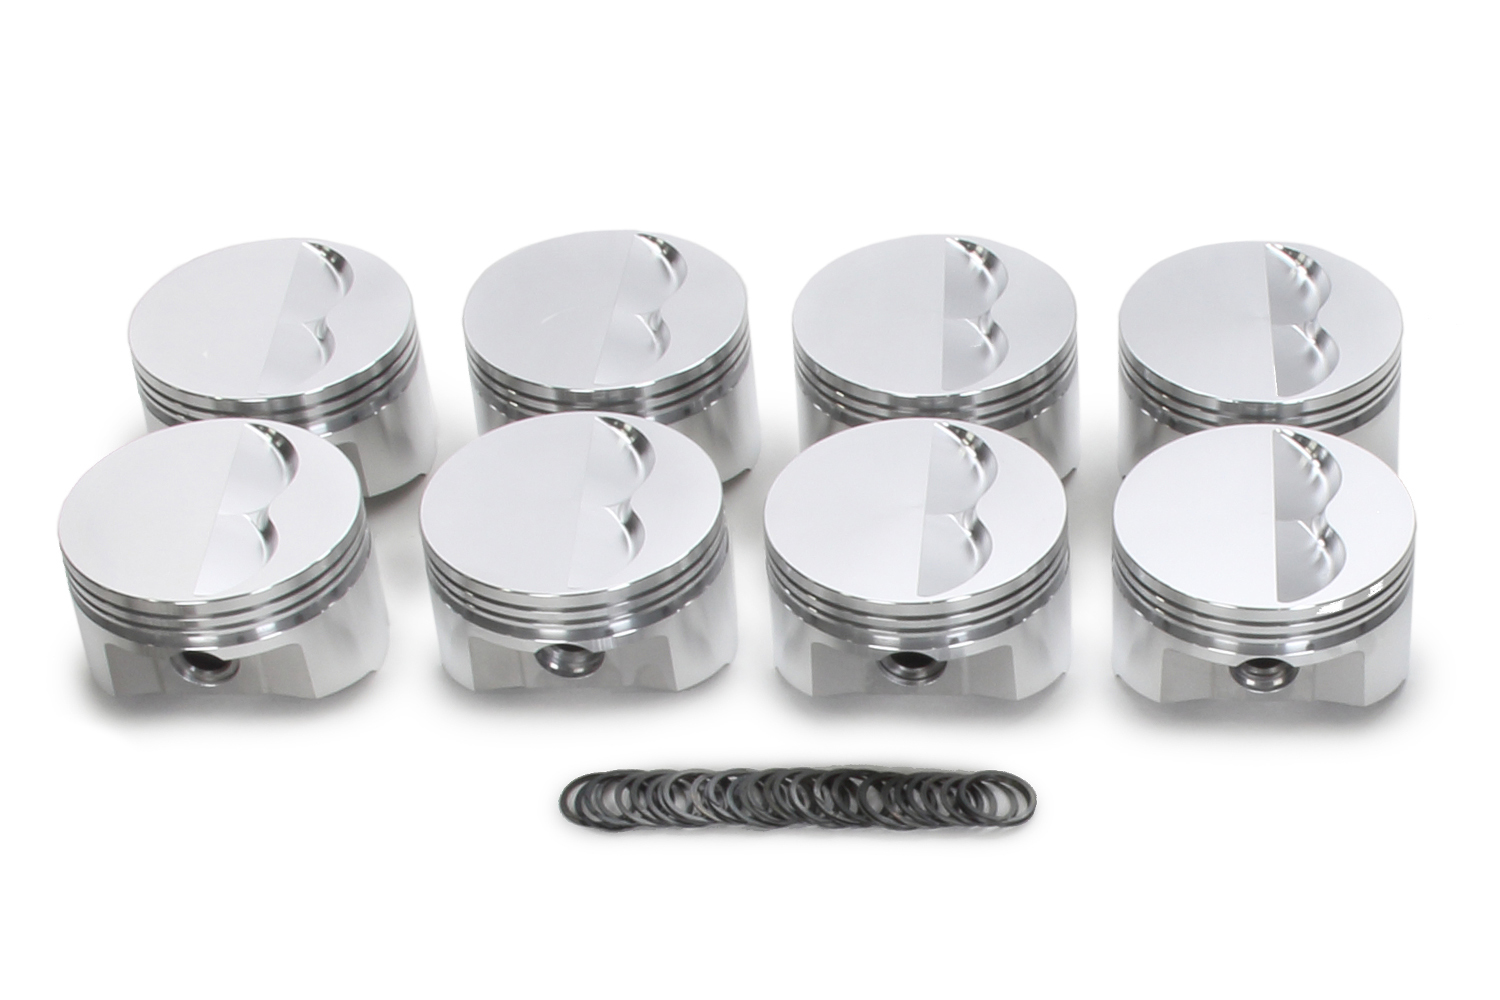 SRP Pistons 138095 Piston, 350 Flat Top, Forged, 4.060 in Bore, 1/16 x 1/16 x 3/16 in Ring Grooves, Minus 5.00 cc, Small Block Chevy, Set of 8